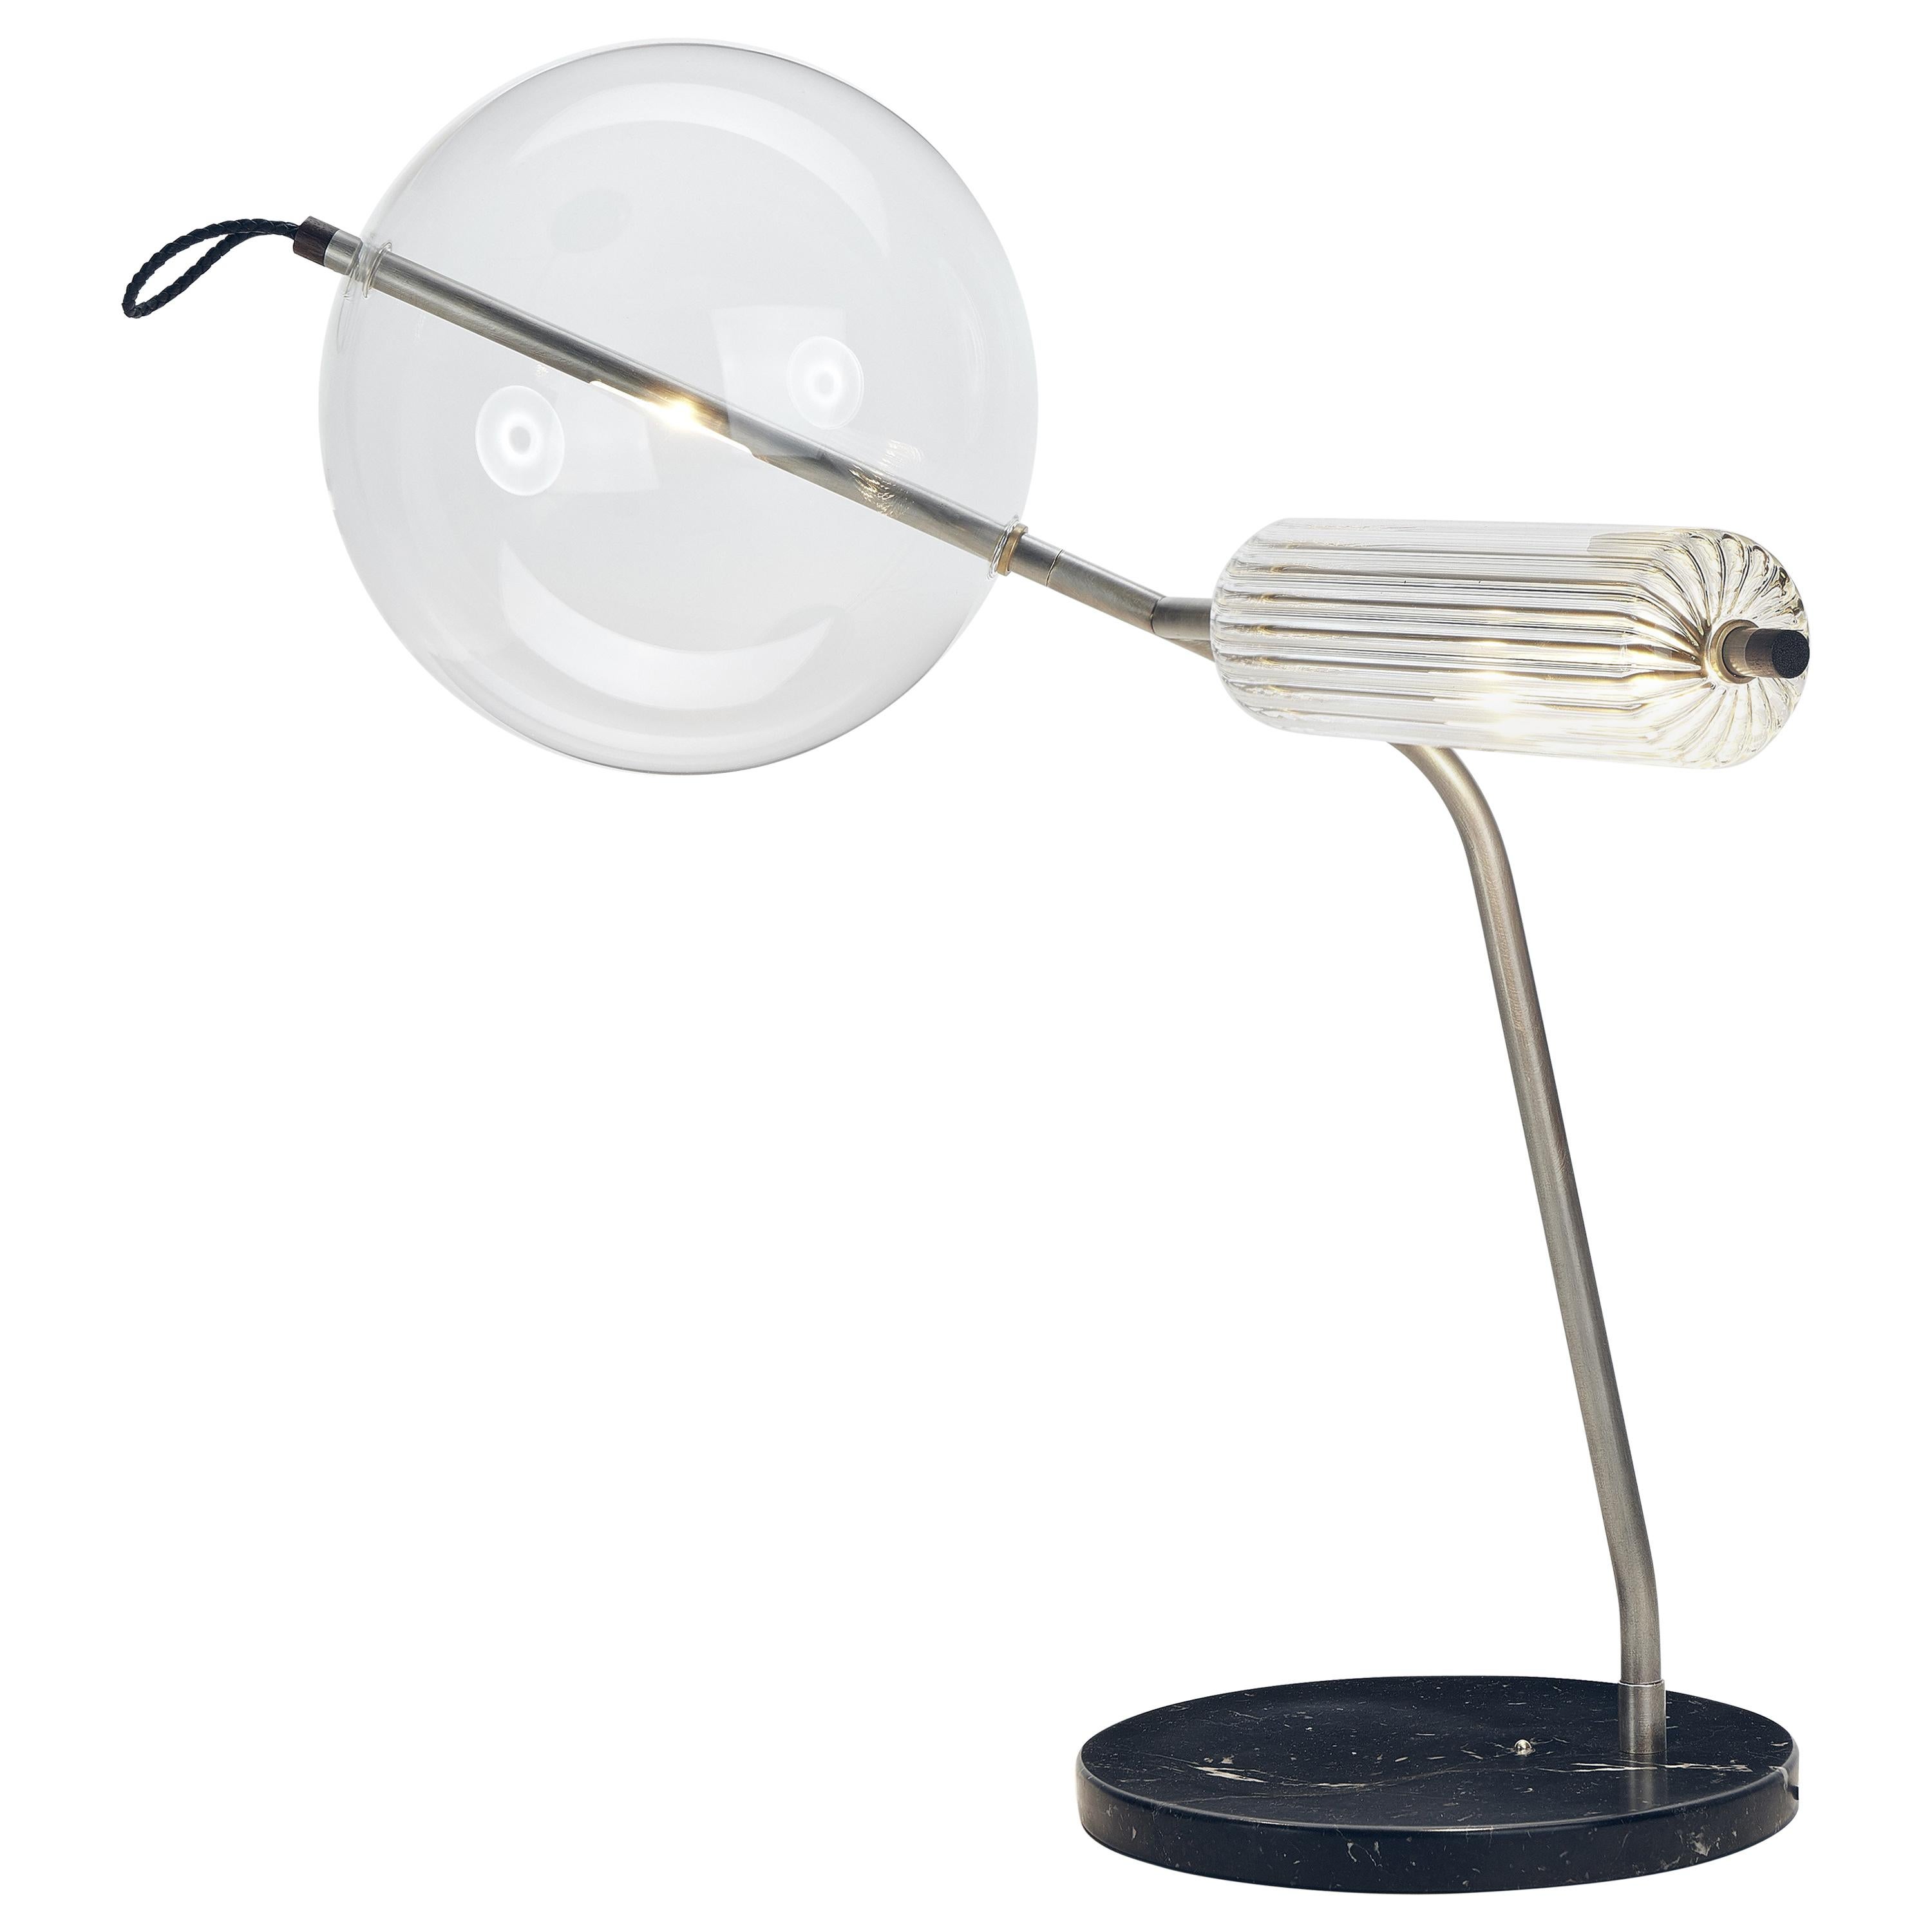 T-Double Tarnished Silver Desk / Table Lamp Adjustable, Dimmable, Brass, Marble